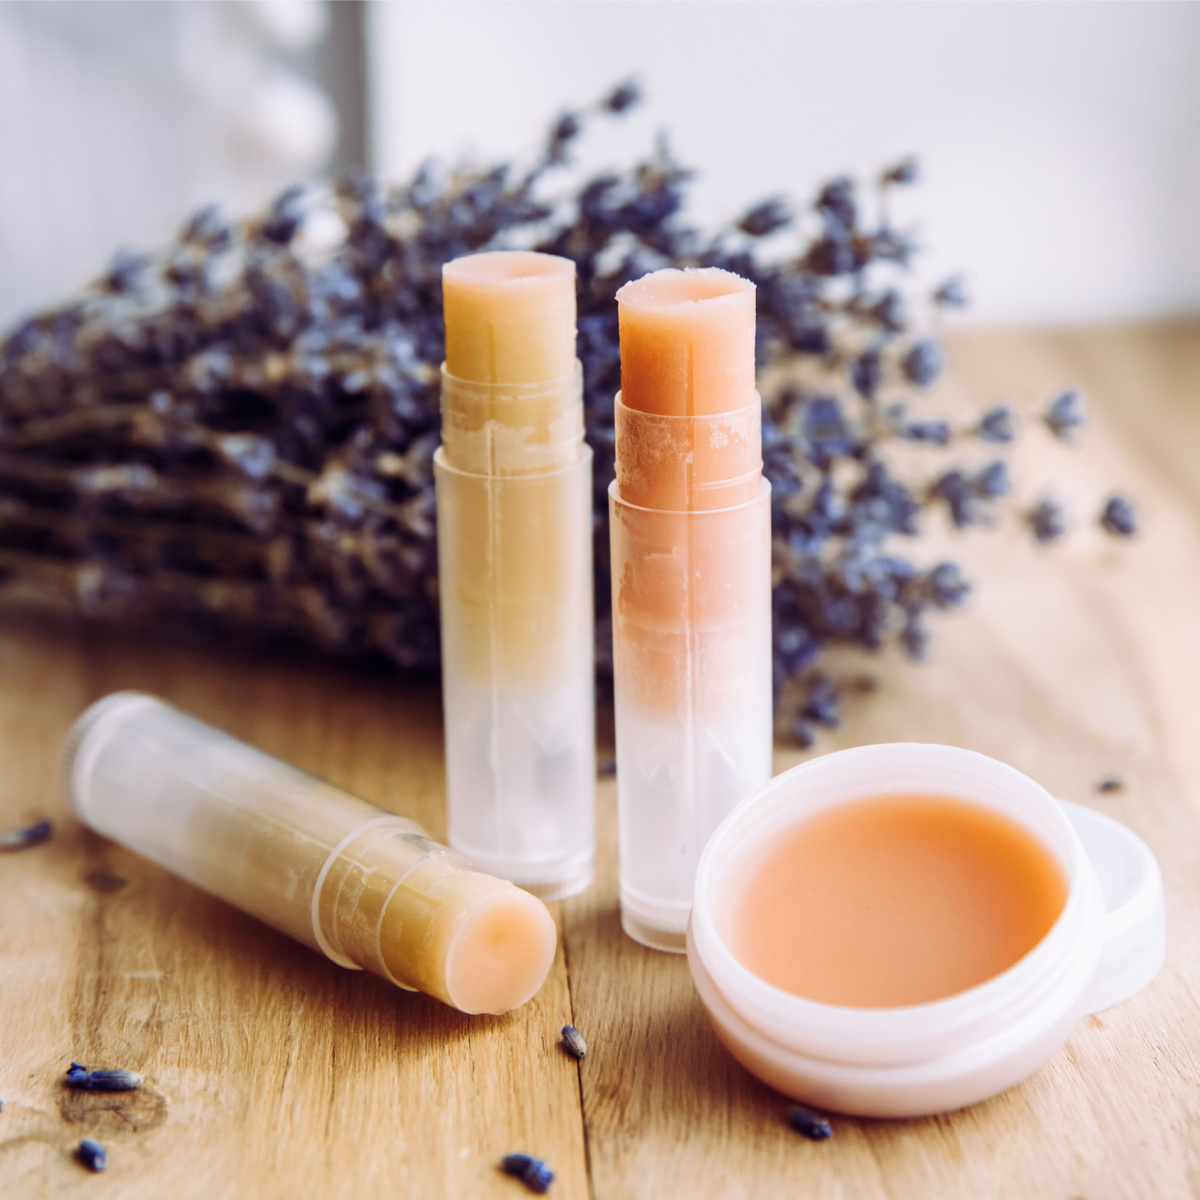 lavender wooden table lip balm sticks lipcare products isolated natural